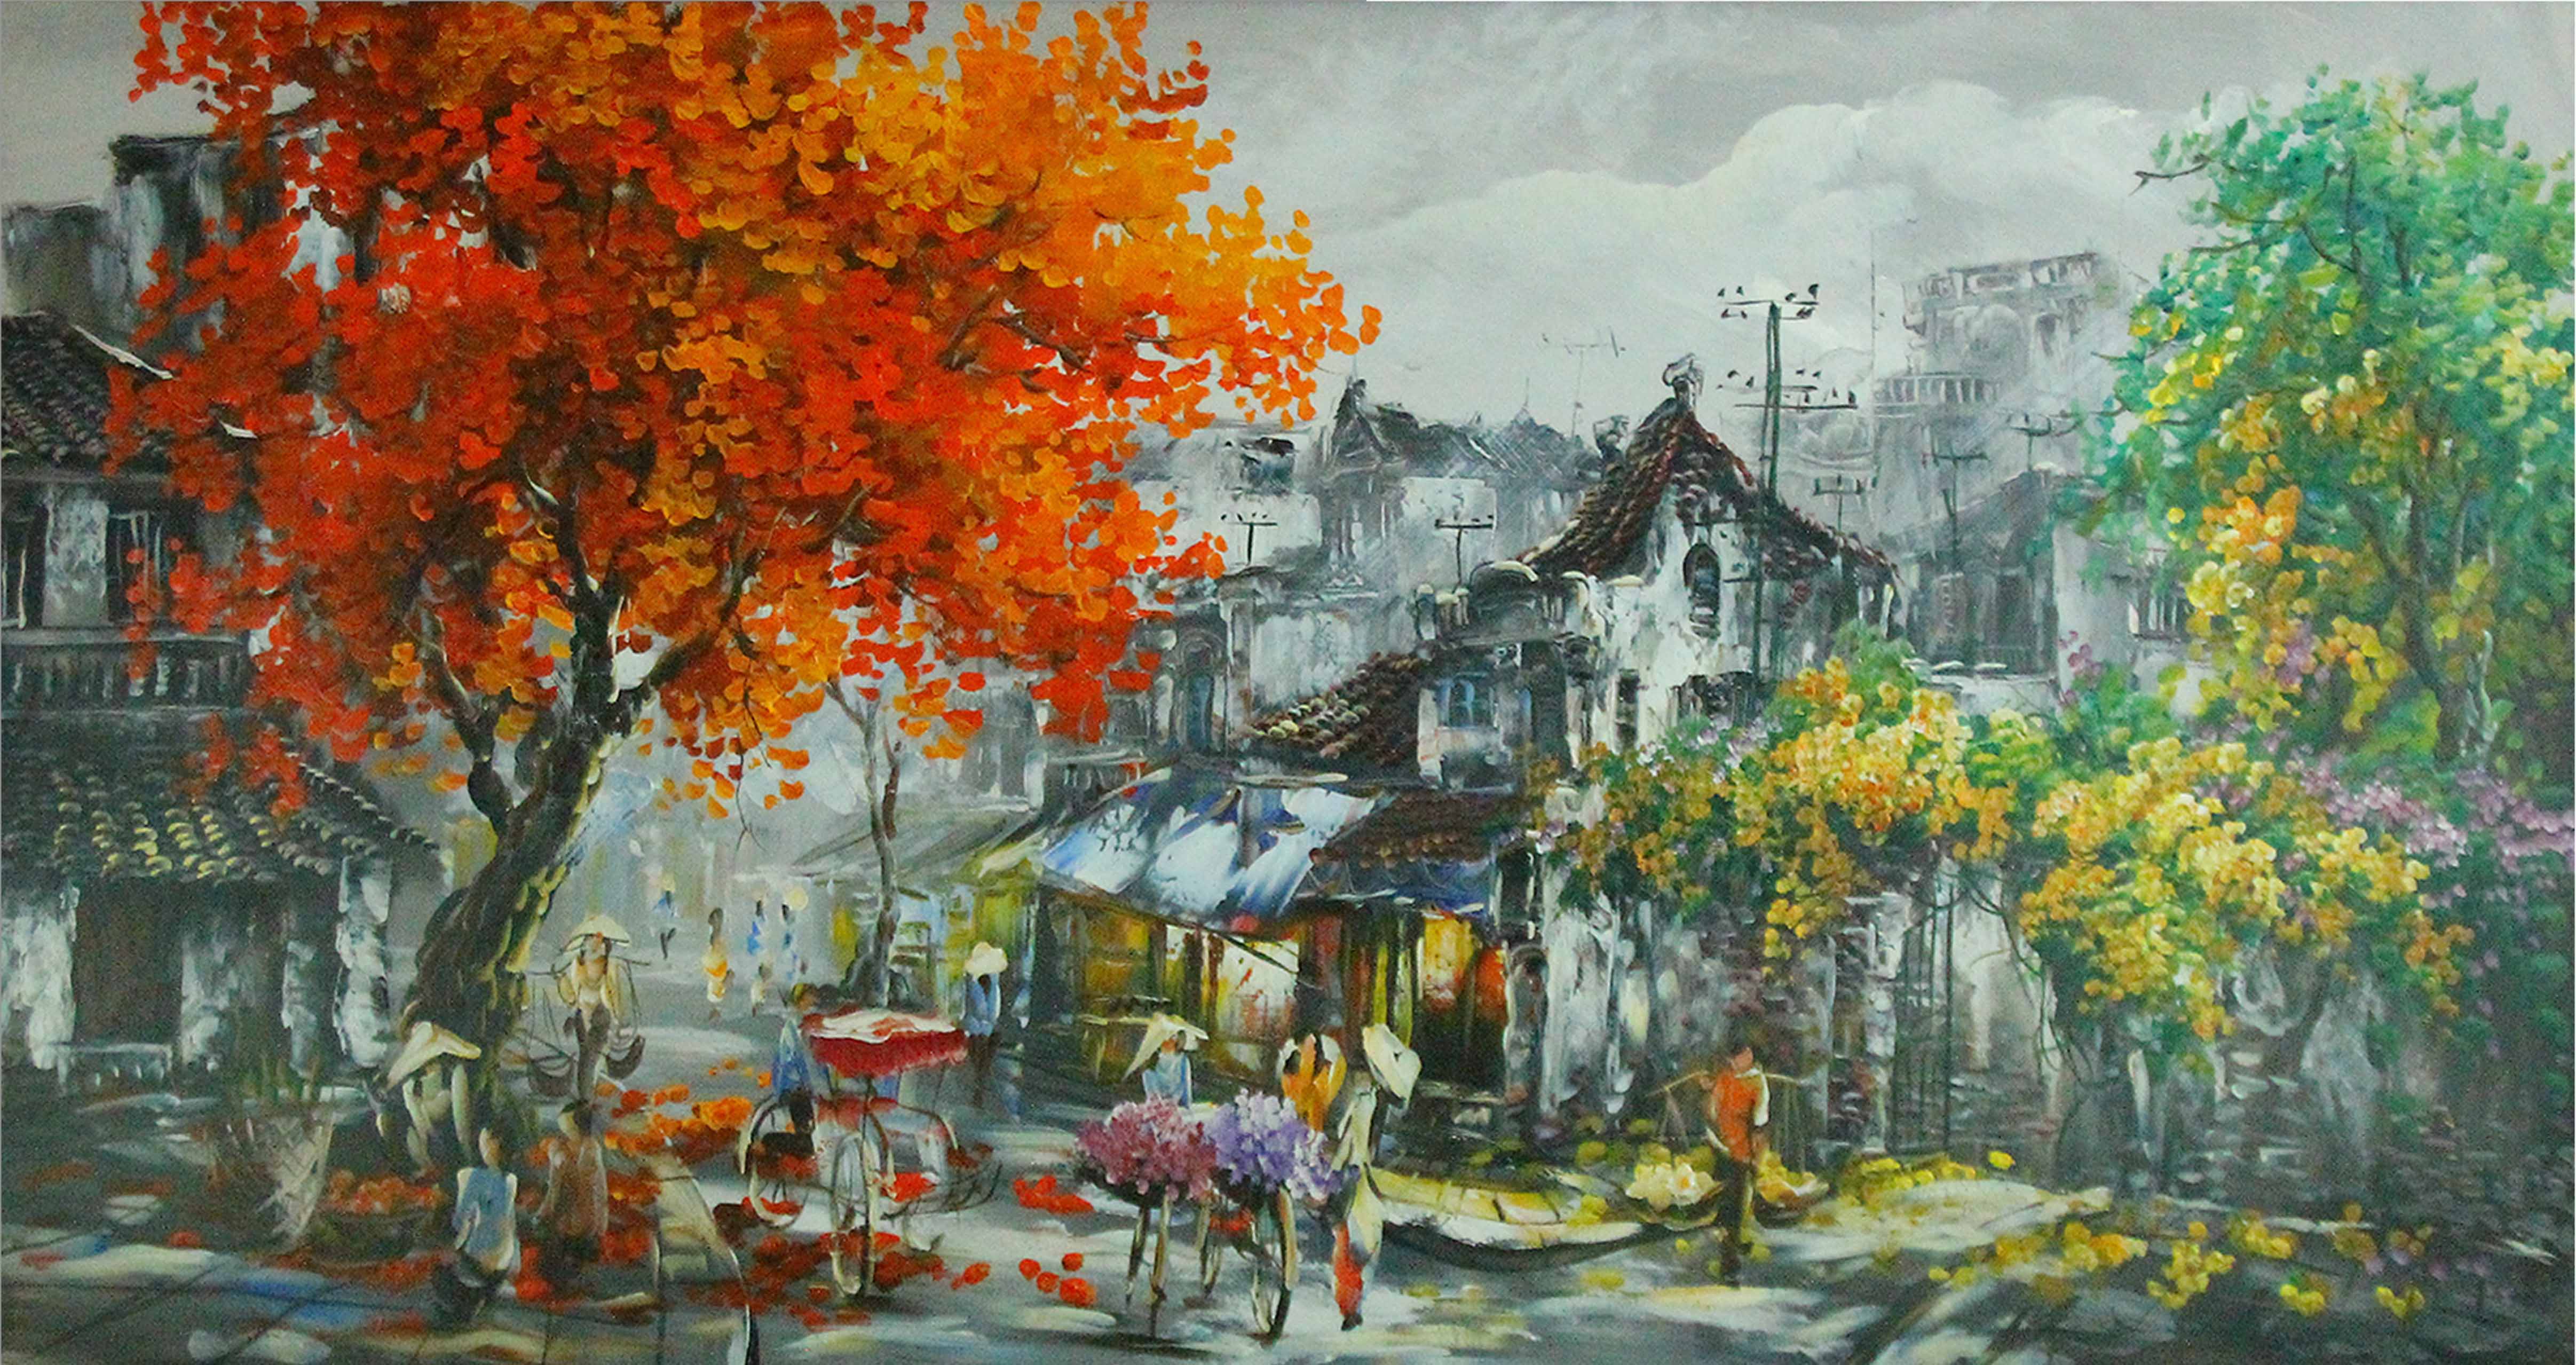 Oil painting of Old town - TSD35LHAR